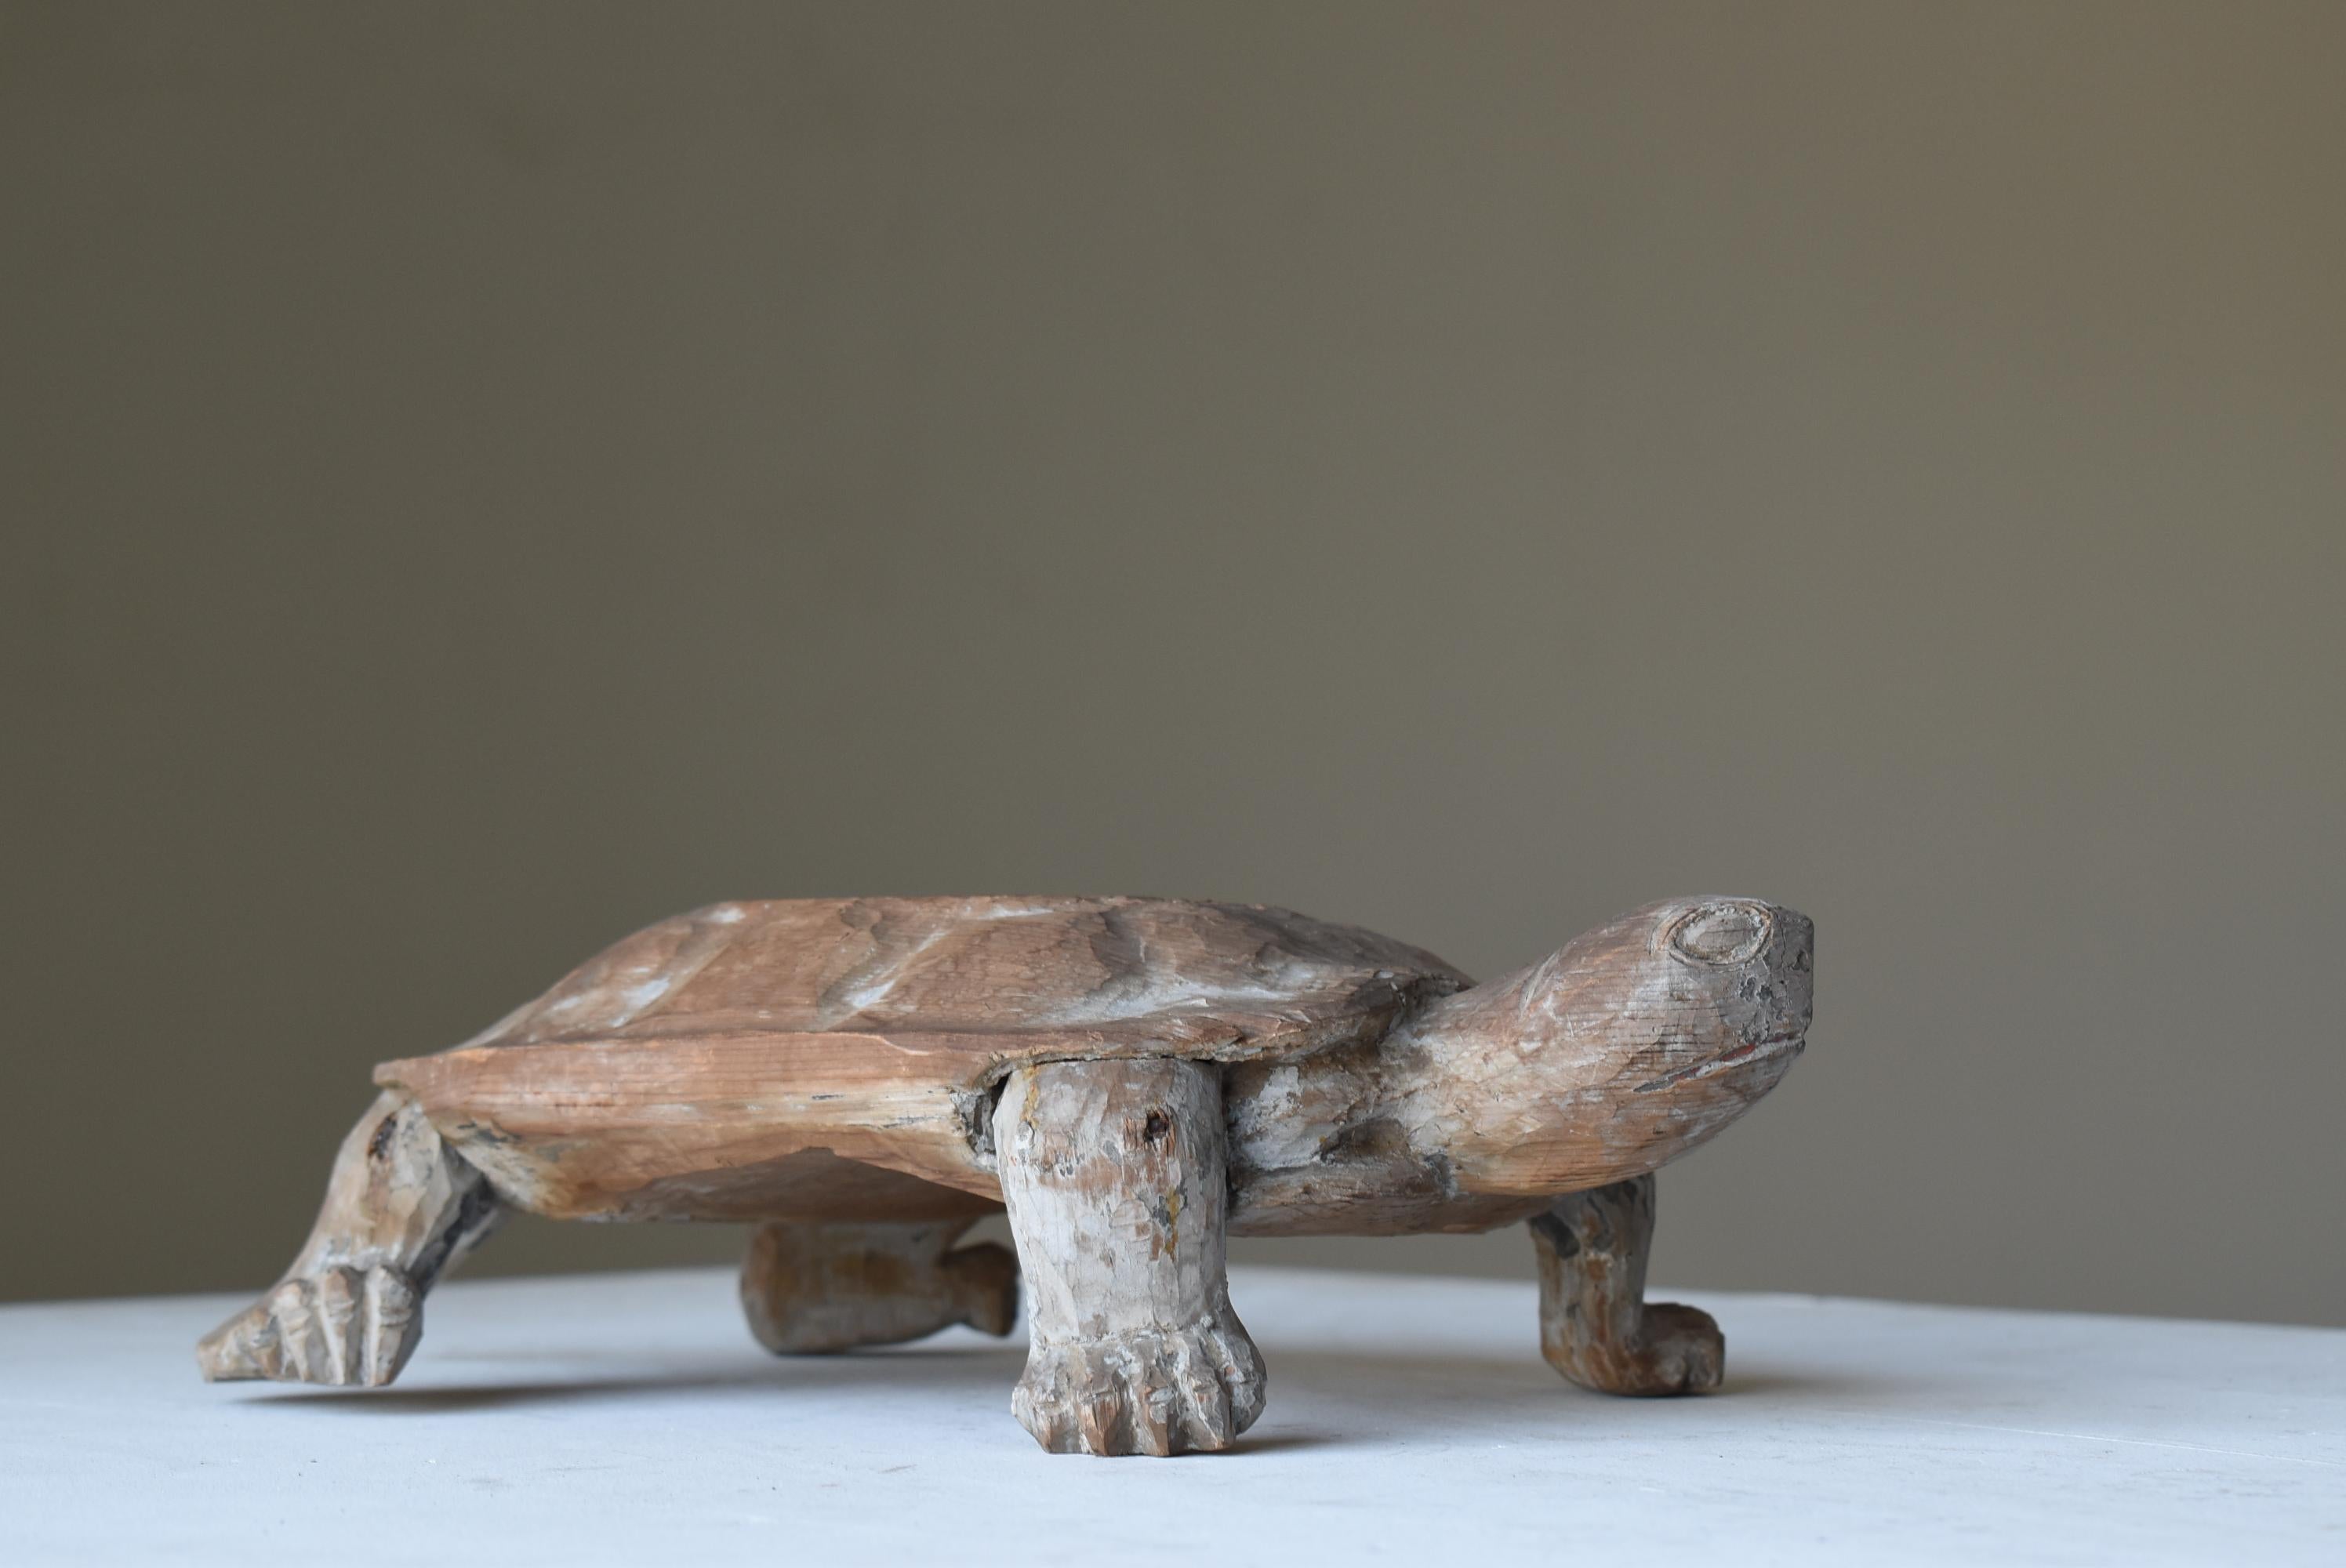 Japanese Antique Wood Carving Turtle 1800s-1860s/Folk Crafts Object Mingei For Sale 2